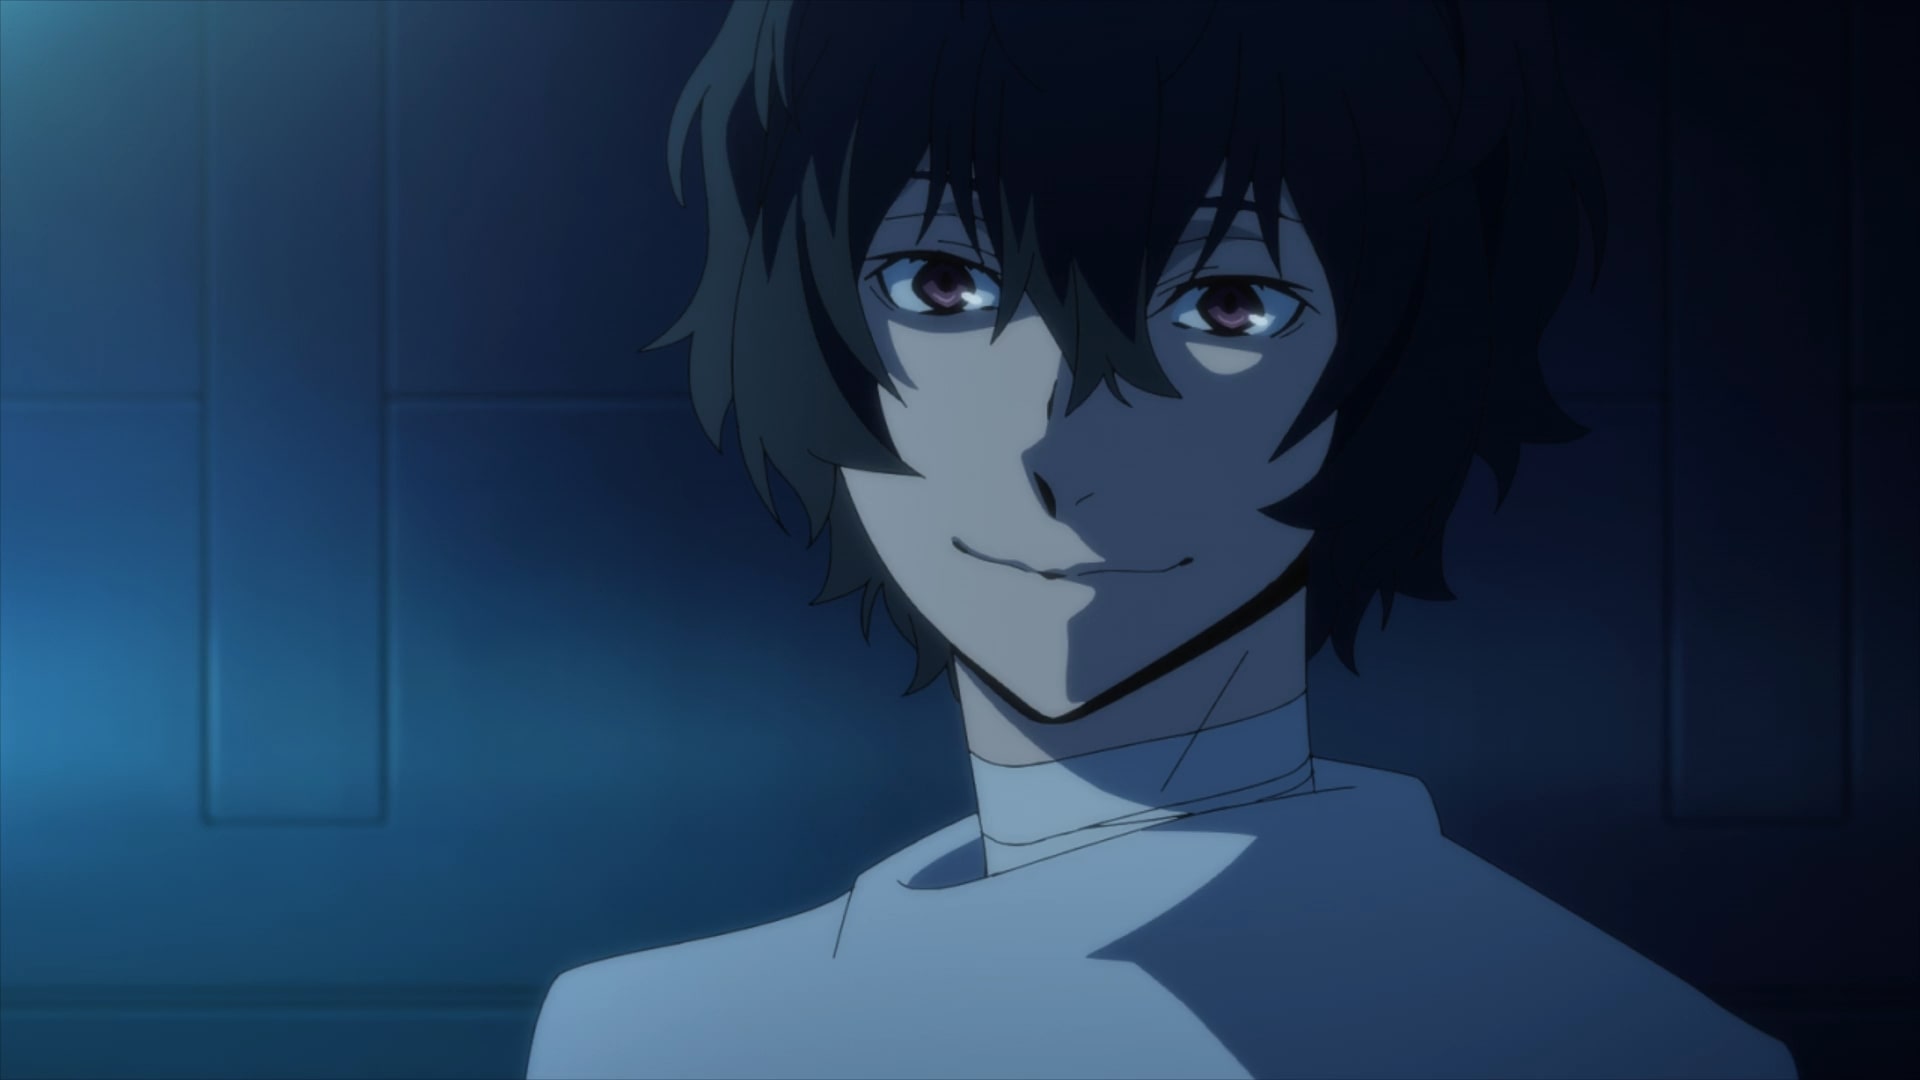 Bungo Stray Dogs Season 5 Reveals Preview for Episode 1 - Anime Corner